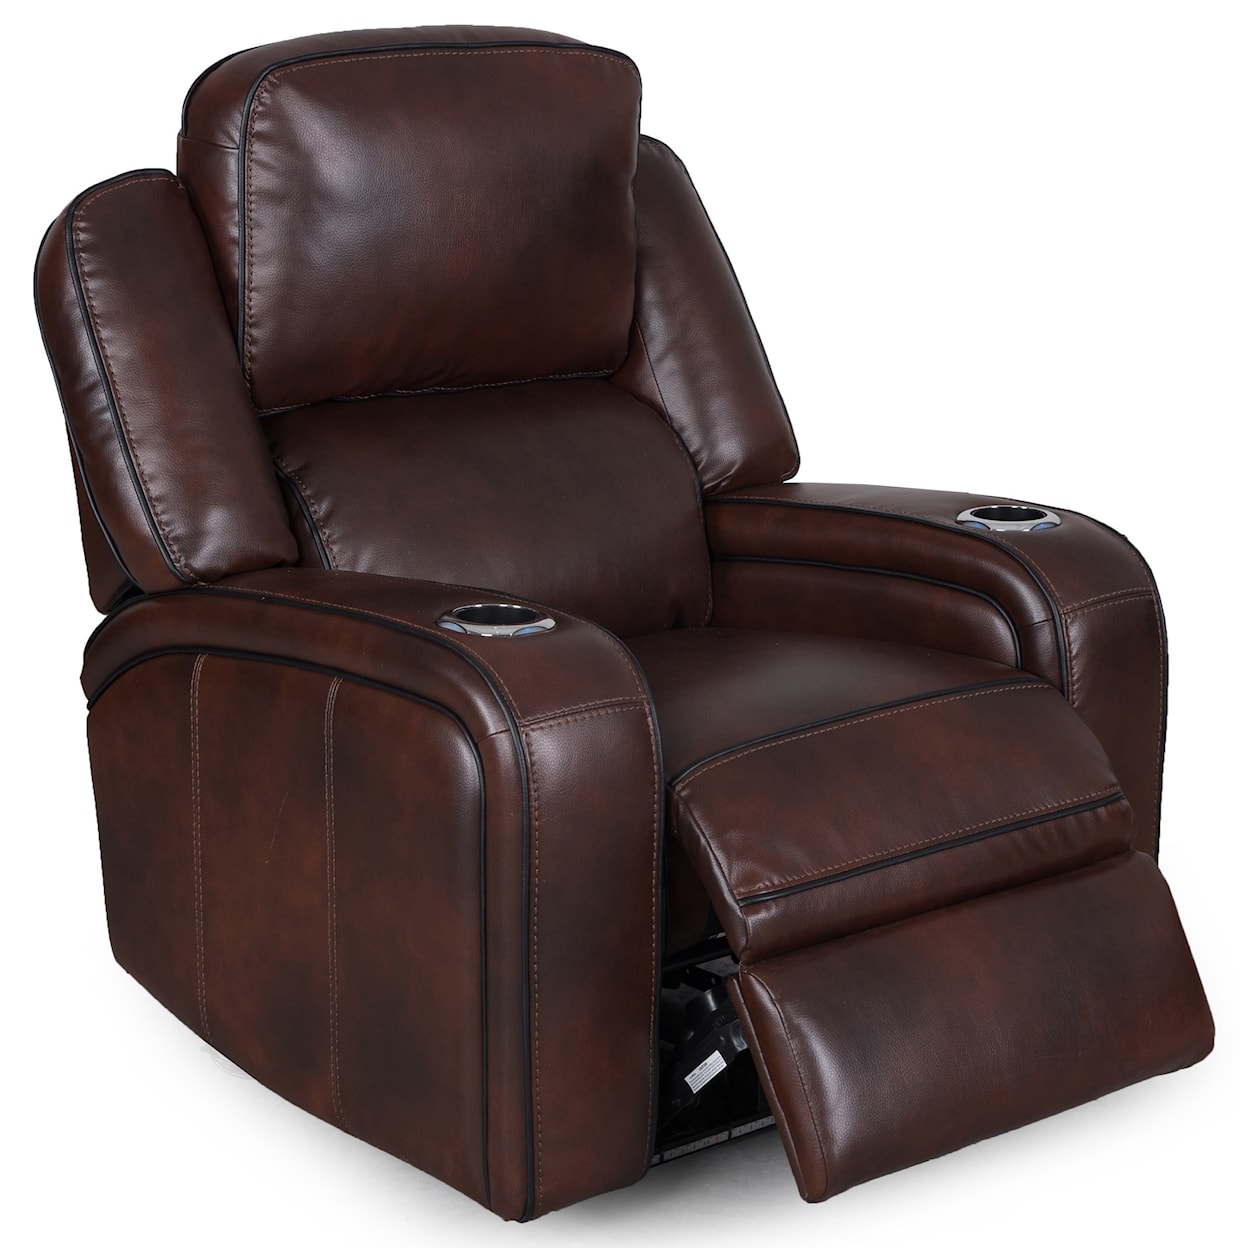 Synergy Home Furnishings Smart Comfort 514 Power Headrest Recliner with LED Lighting